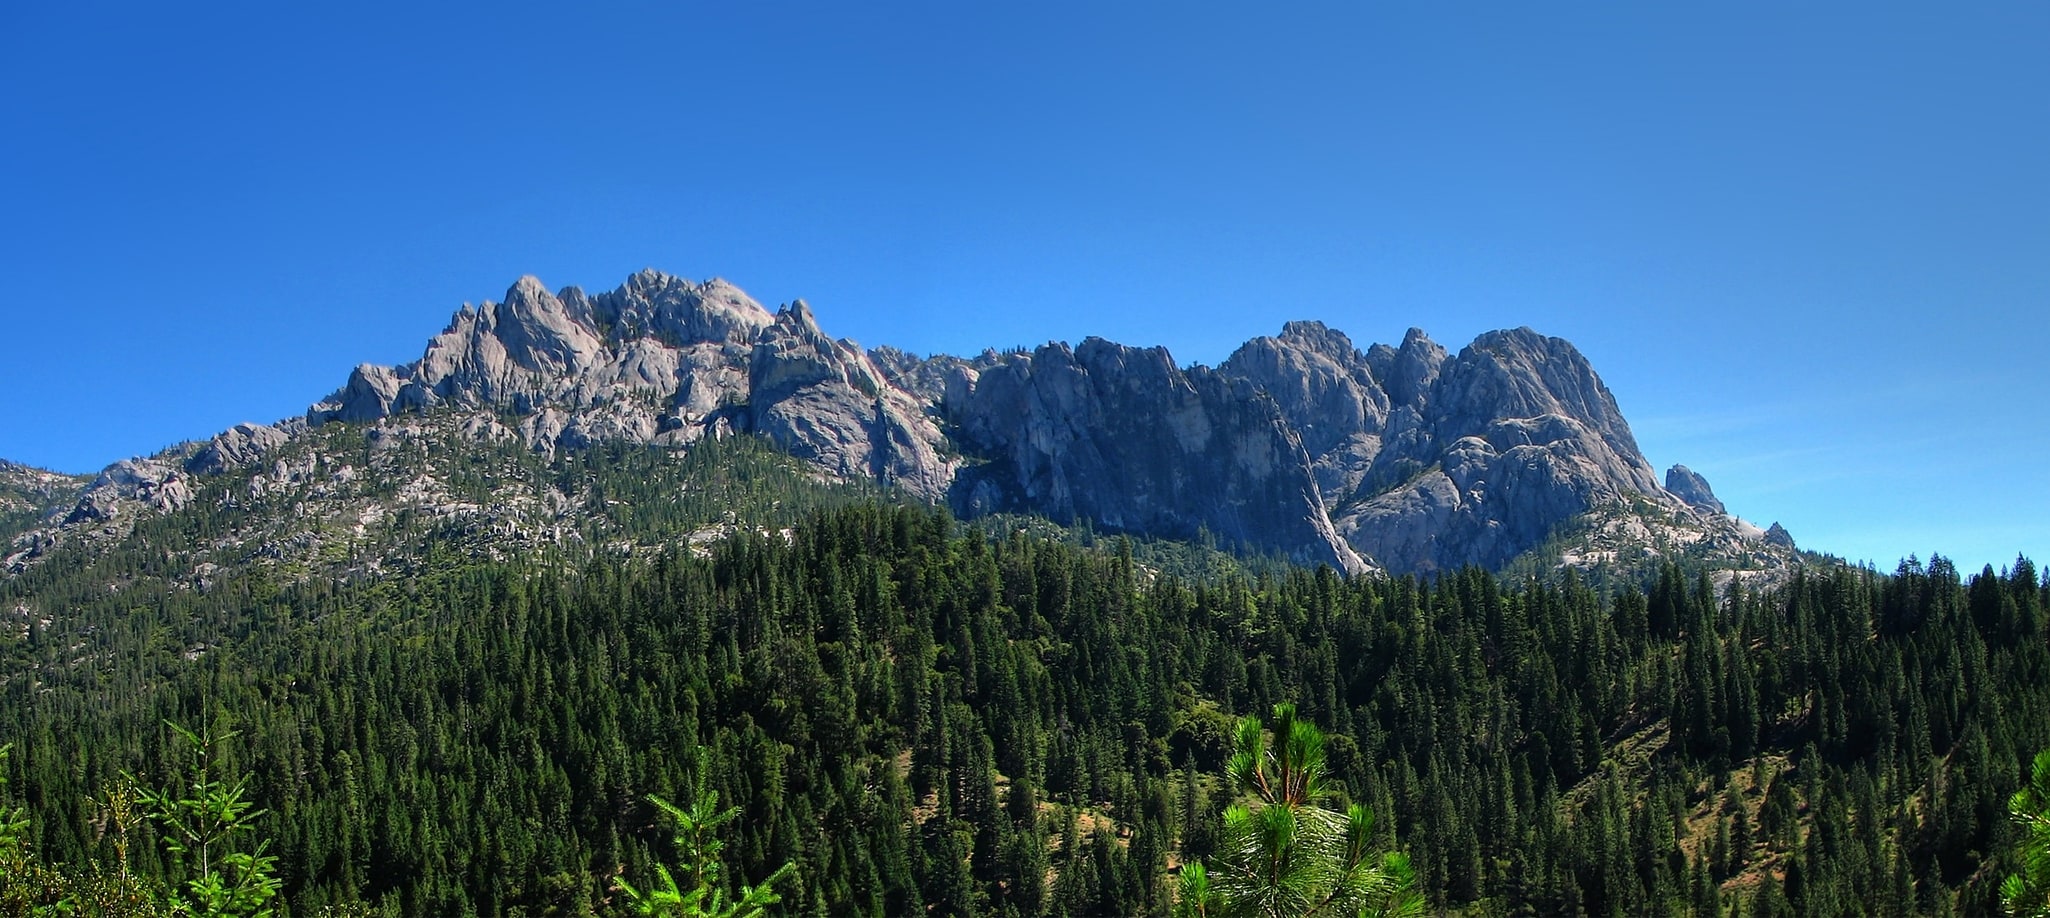 Castle Crags Wilderness, Stany Zjednoczone